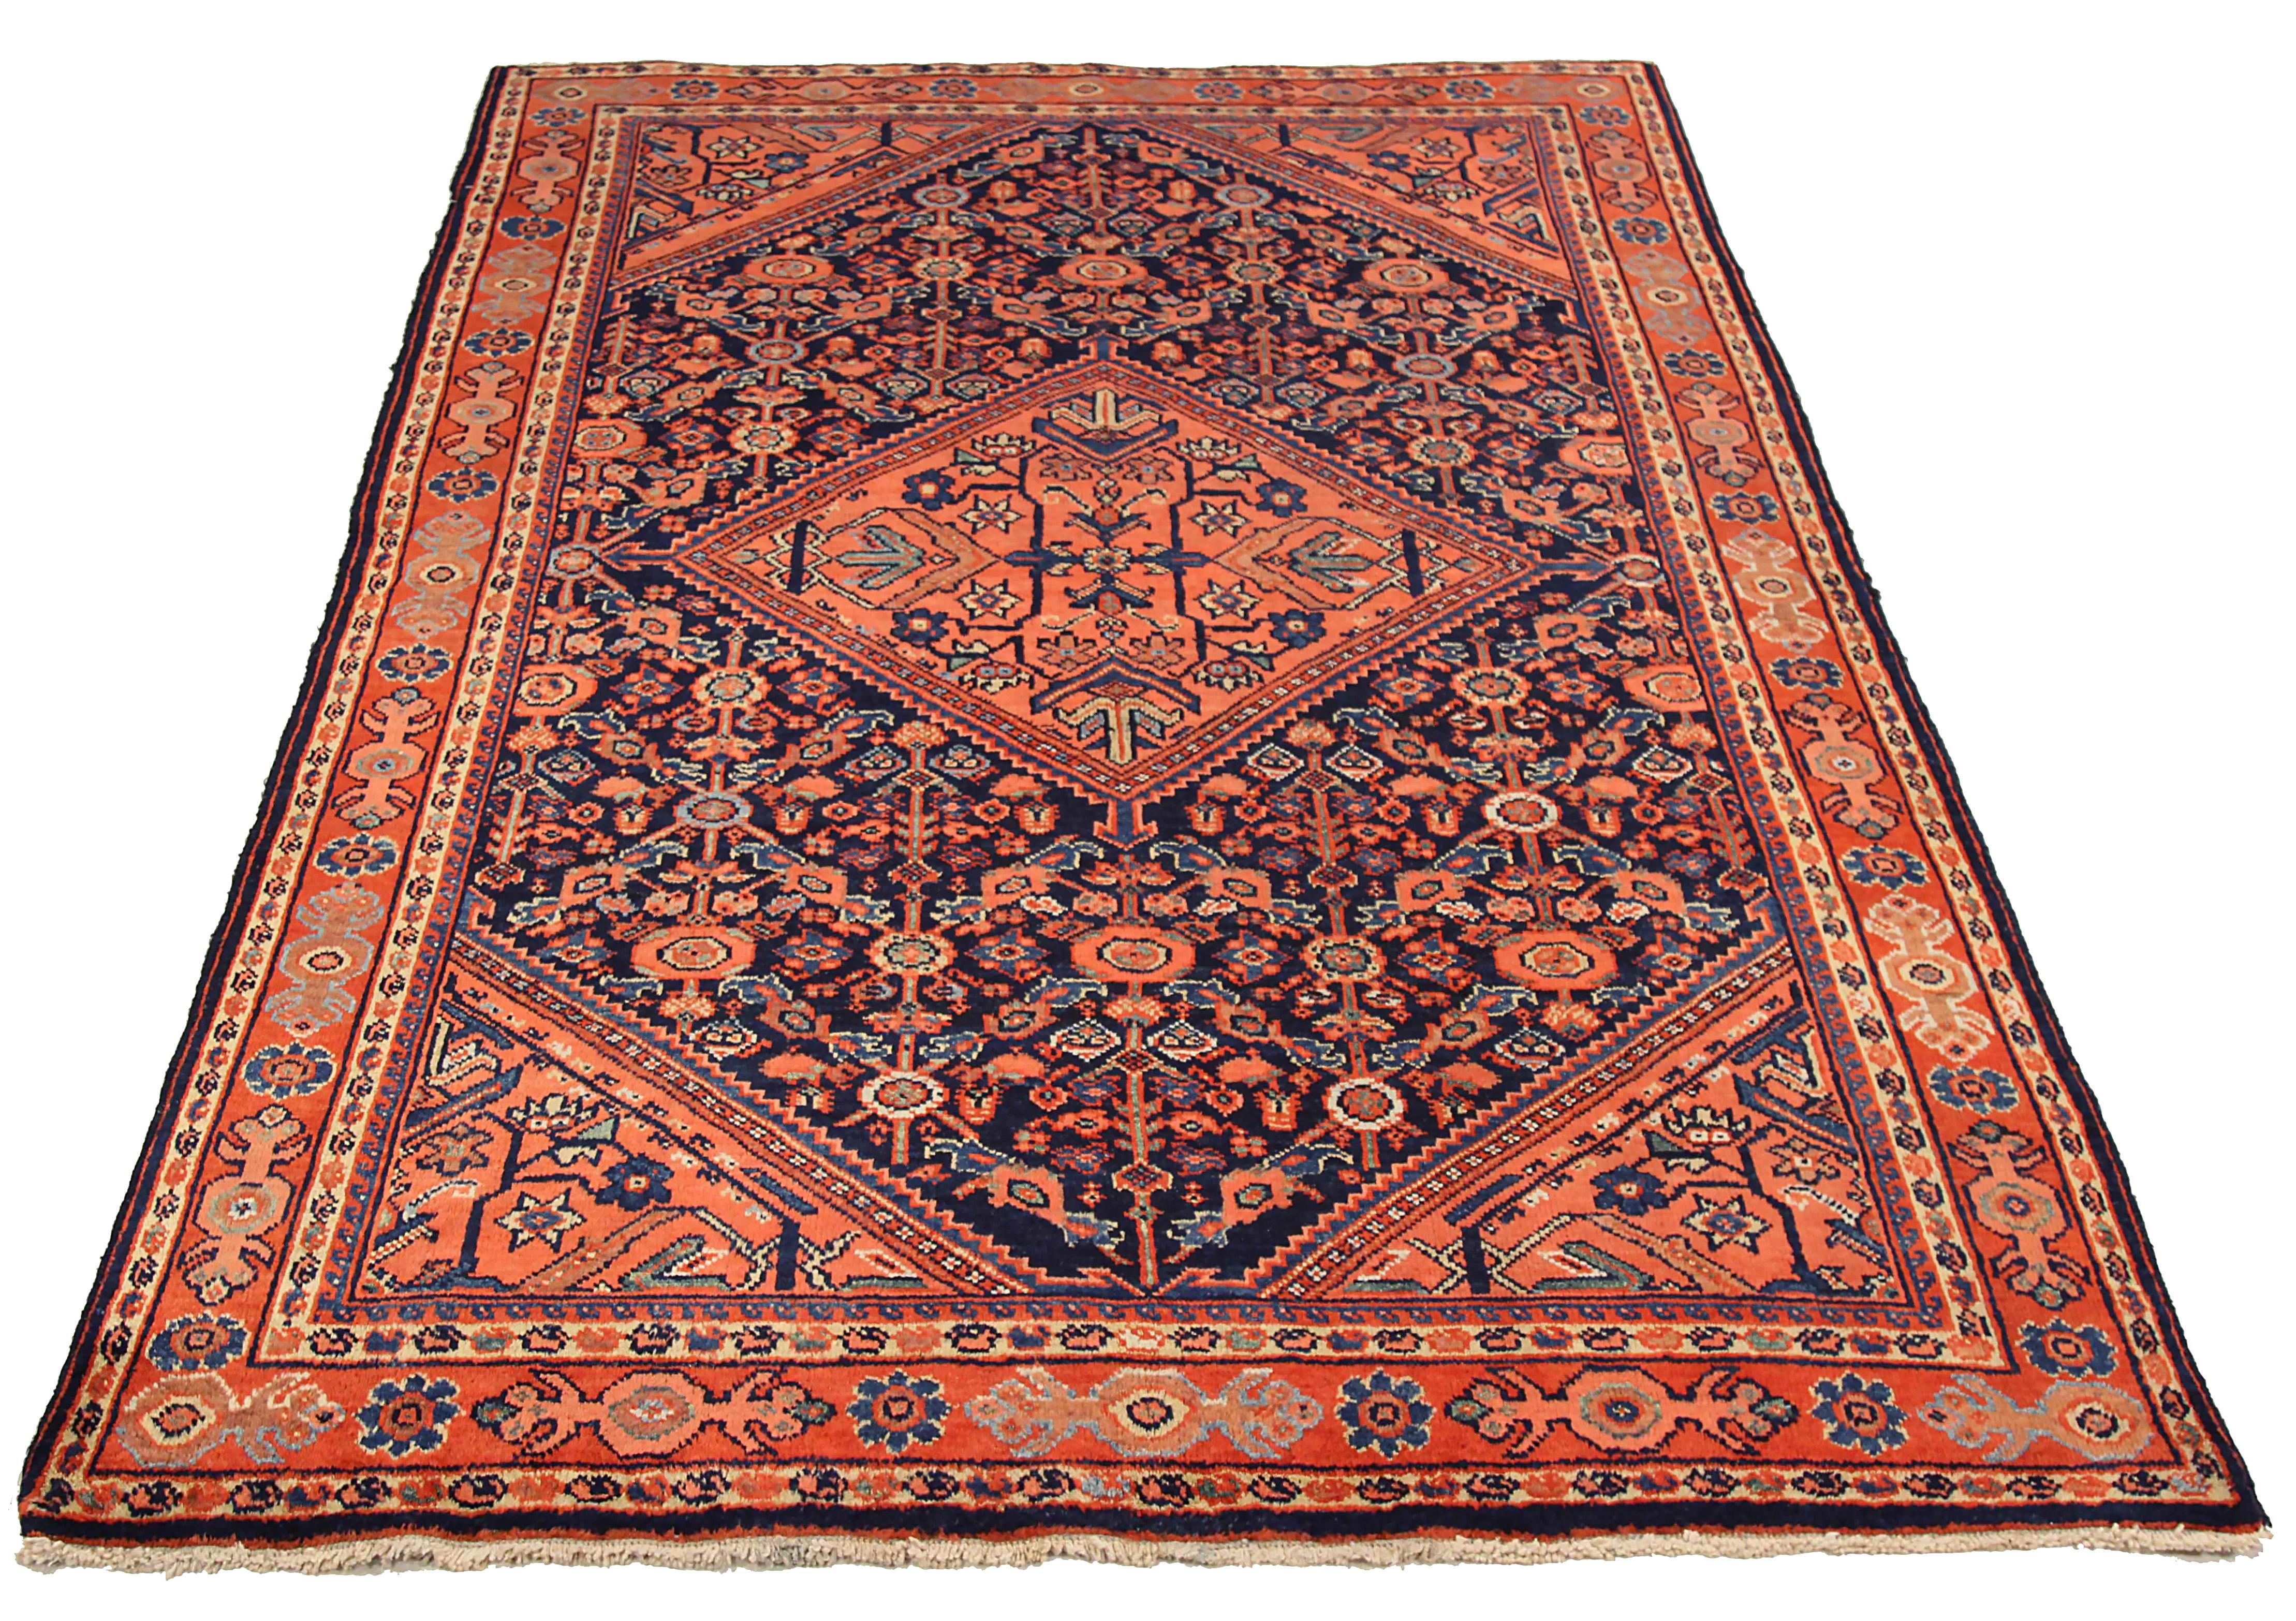 Antique Persian area rug handwoven from the finest sheep’s wool. It’s colored with all-natural vegetable dyes that are safe for humans and pets. It’s a traditional Sultanabad design handwoven by expert artisans. It’s a lovely area rug that can be